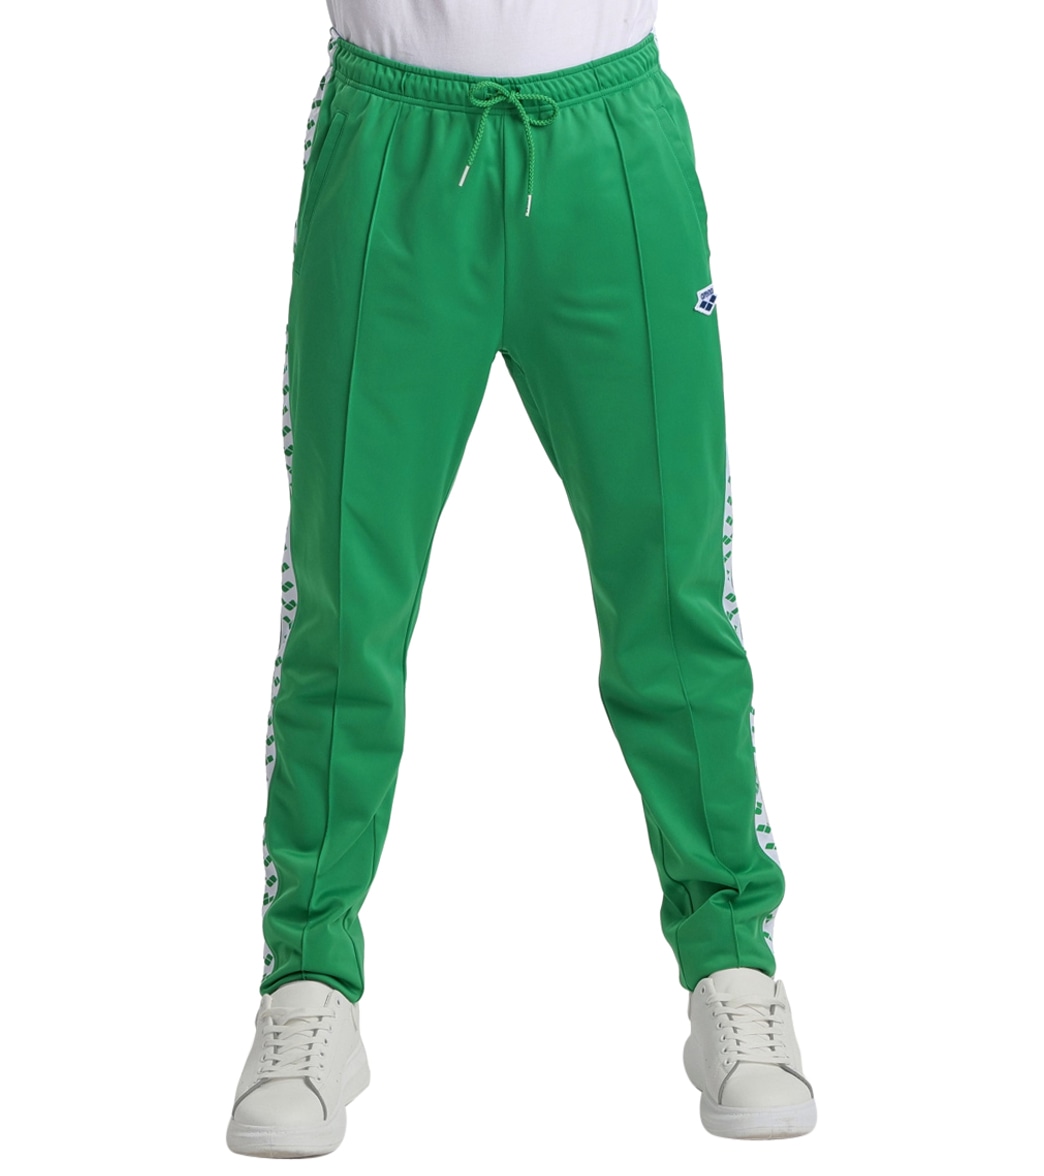 Arena Men's Relax Iv Team Pants - Green/White/Team Green Large Polyester - Swimoutlet.com